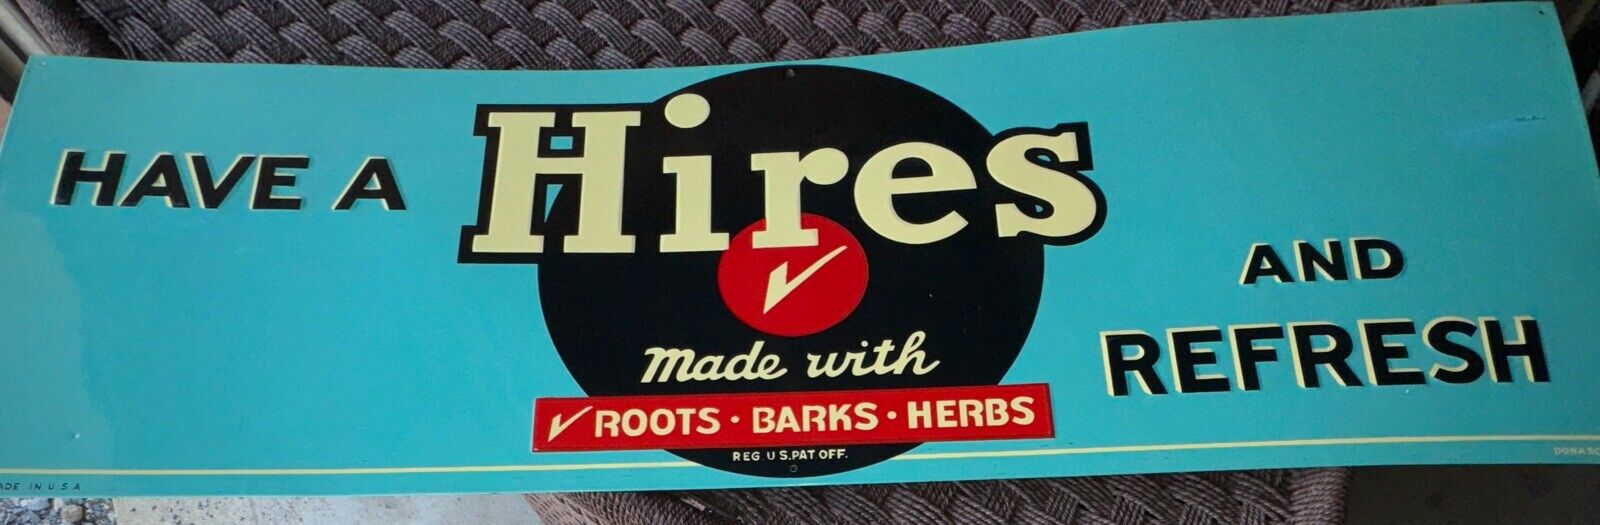 Hires Advertising Sign